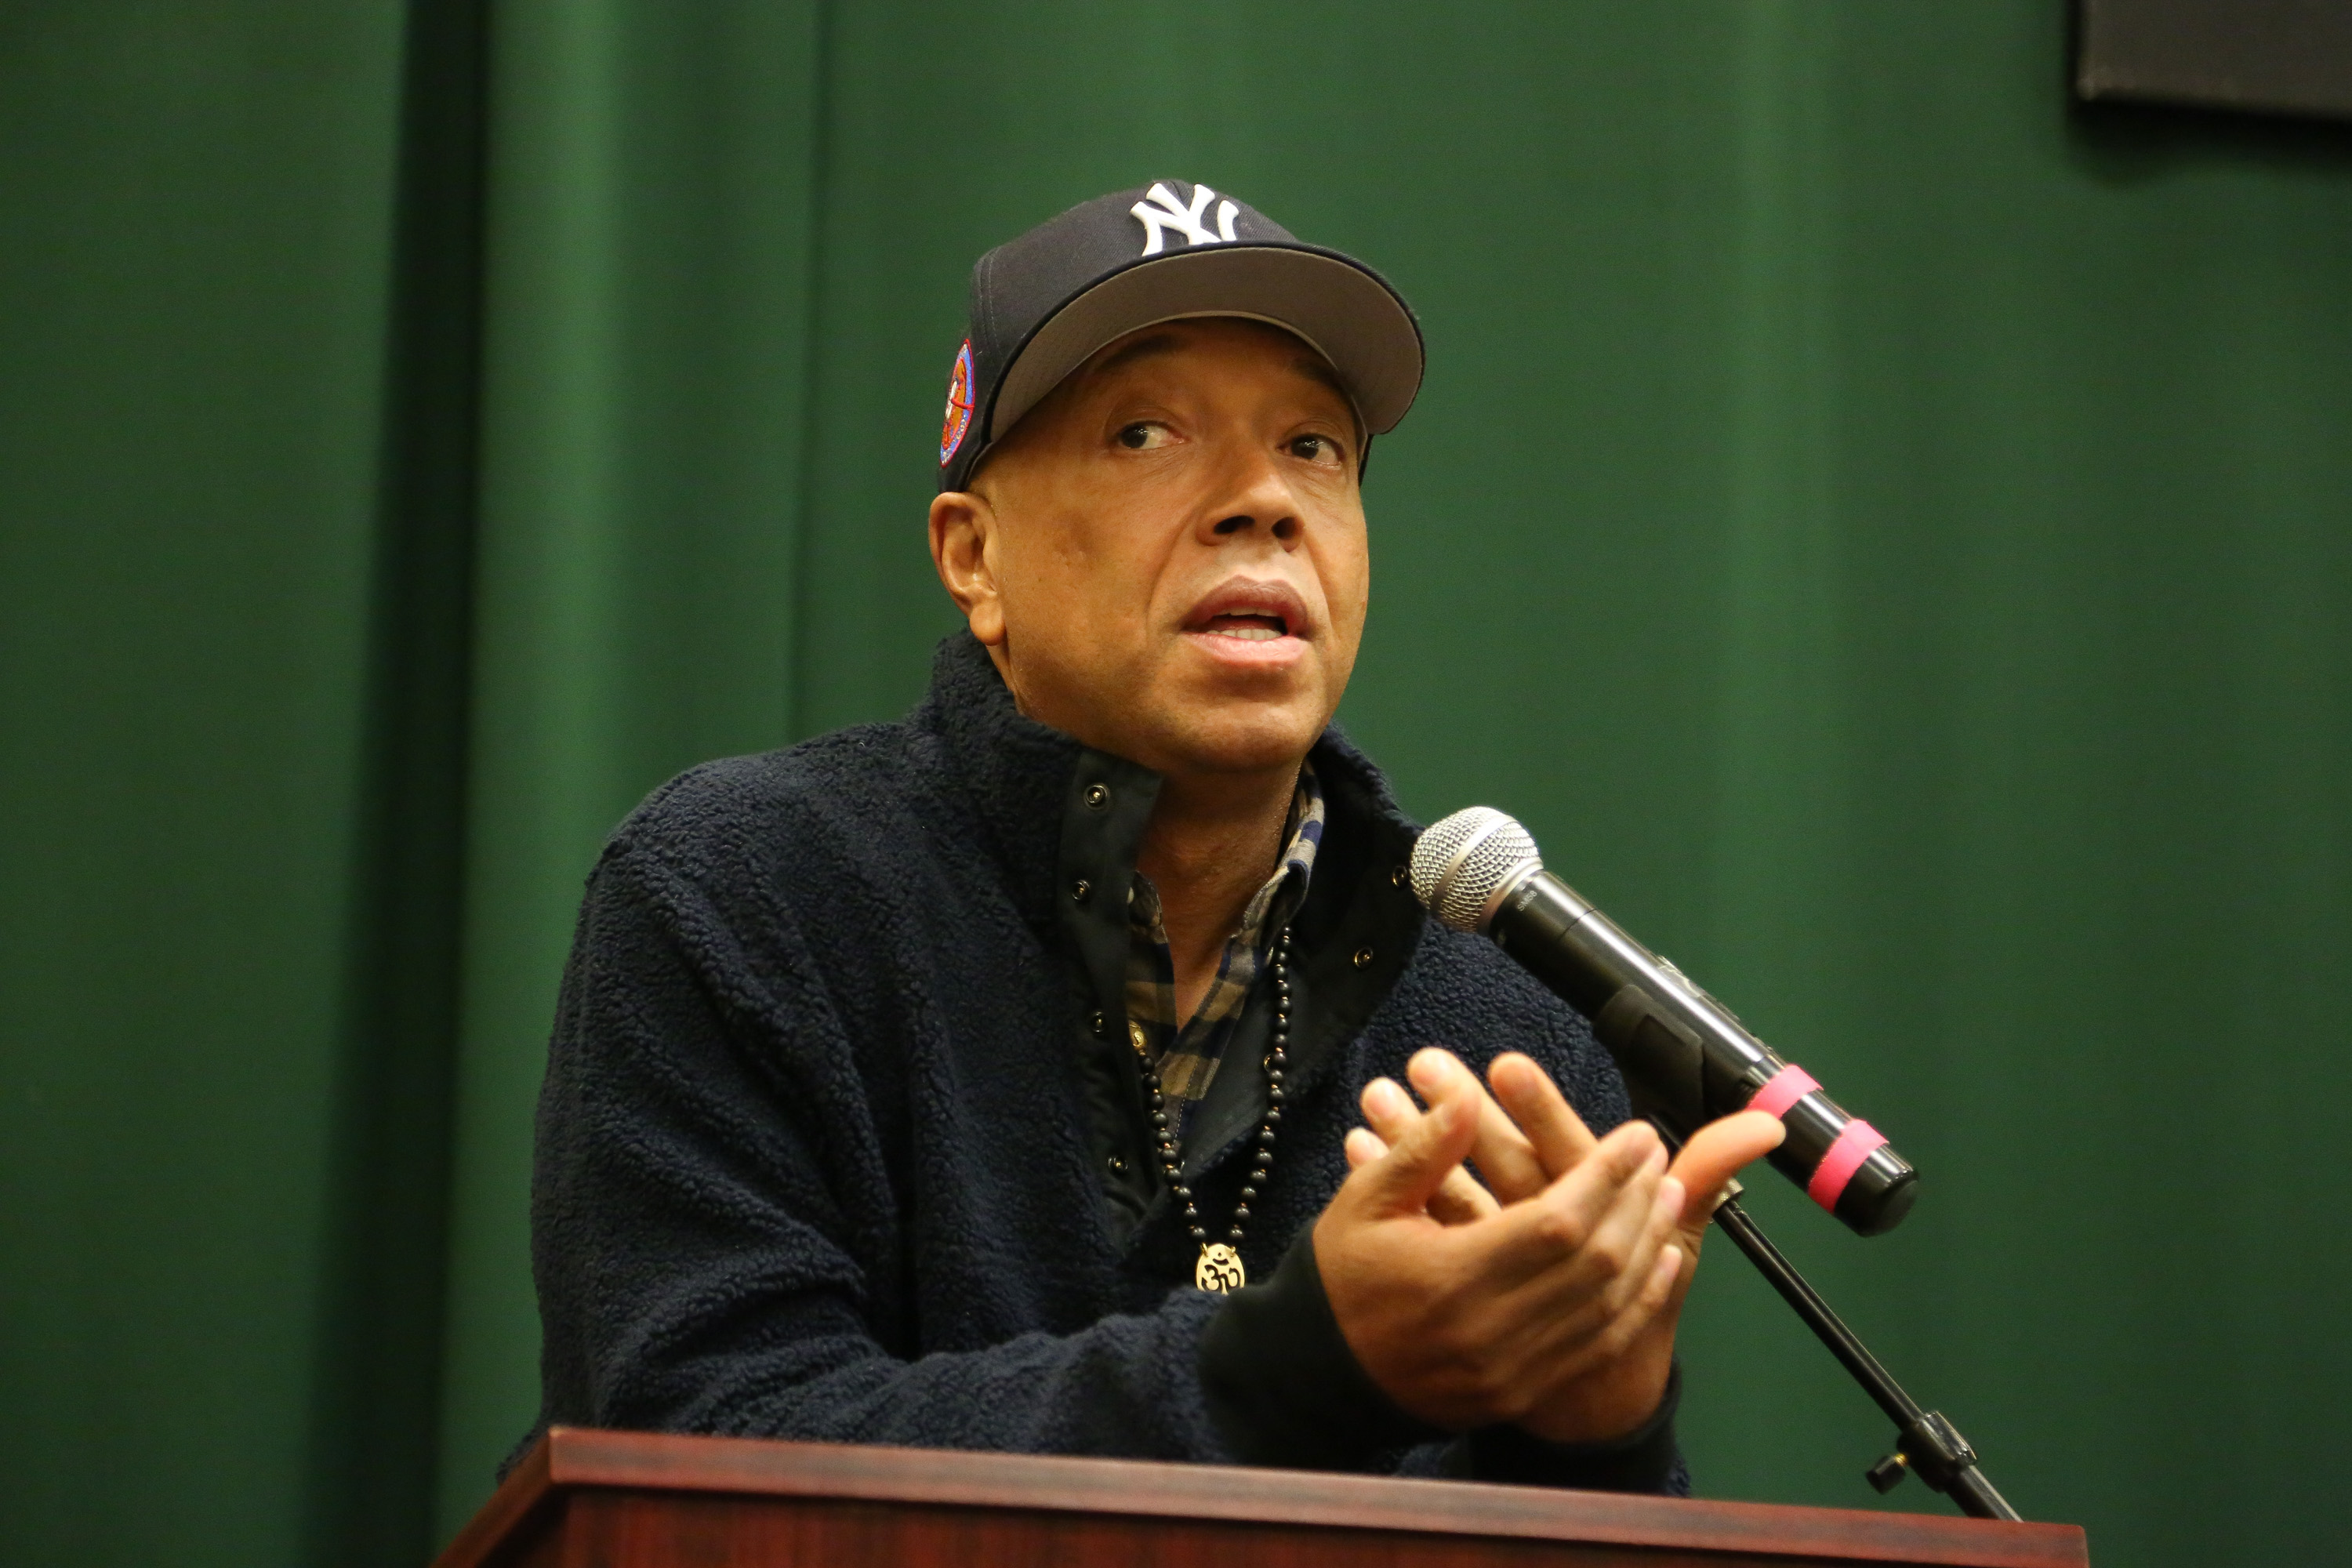 Russell Simmons promotes his new book, "The Happy Vegan: A Guide To Living A Long, Healthy, and Successful Life,"  Jan. 12, 2016 in New York City (Rob Kim—Getty Images)